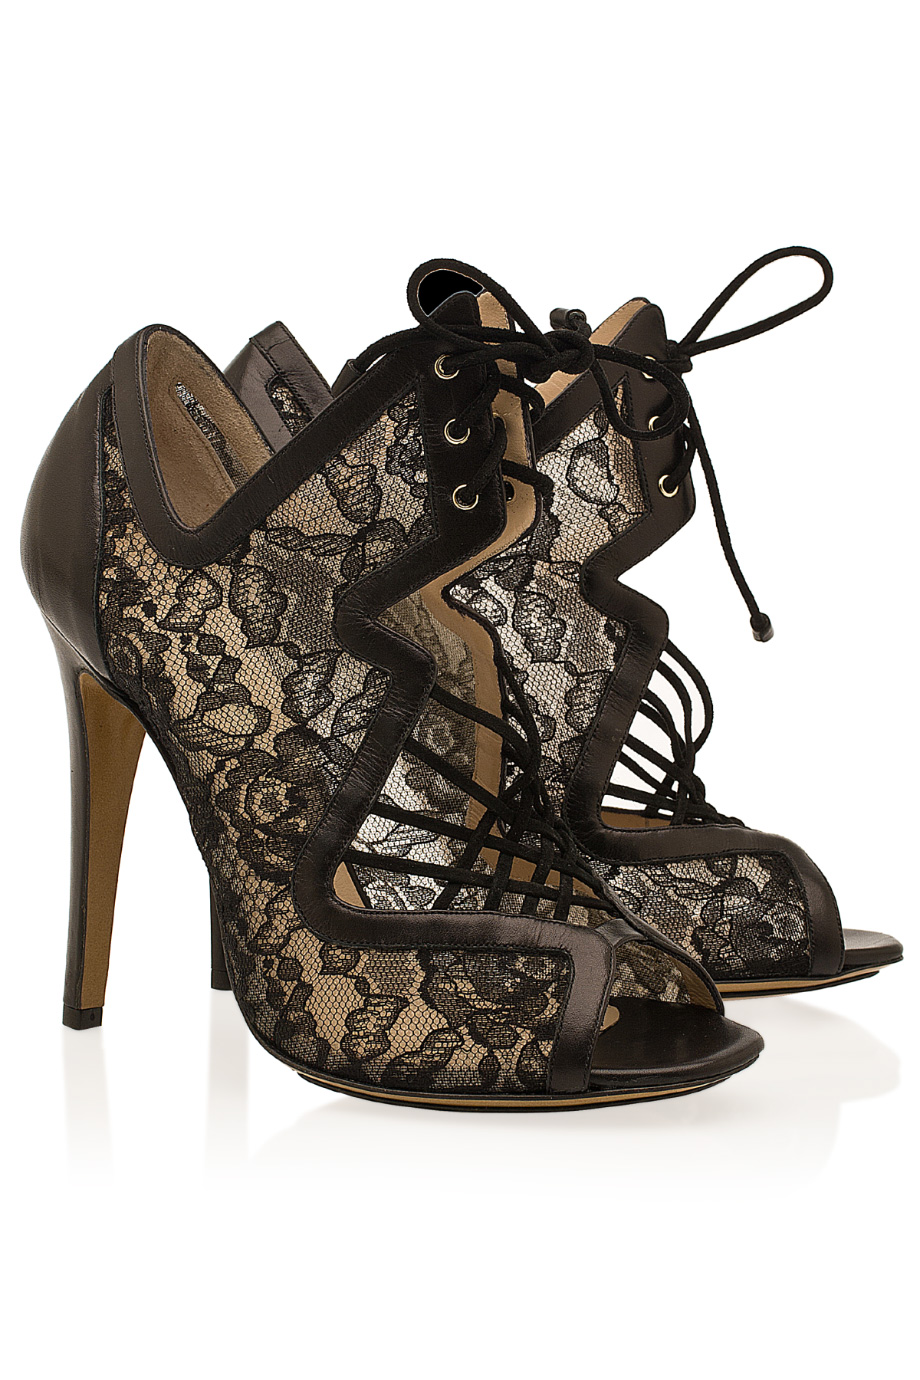 Nicholas kirkwood Lace & Suede Cage Ankle Boots in Black | Lyst